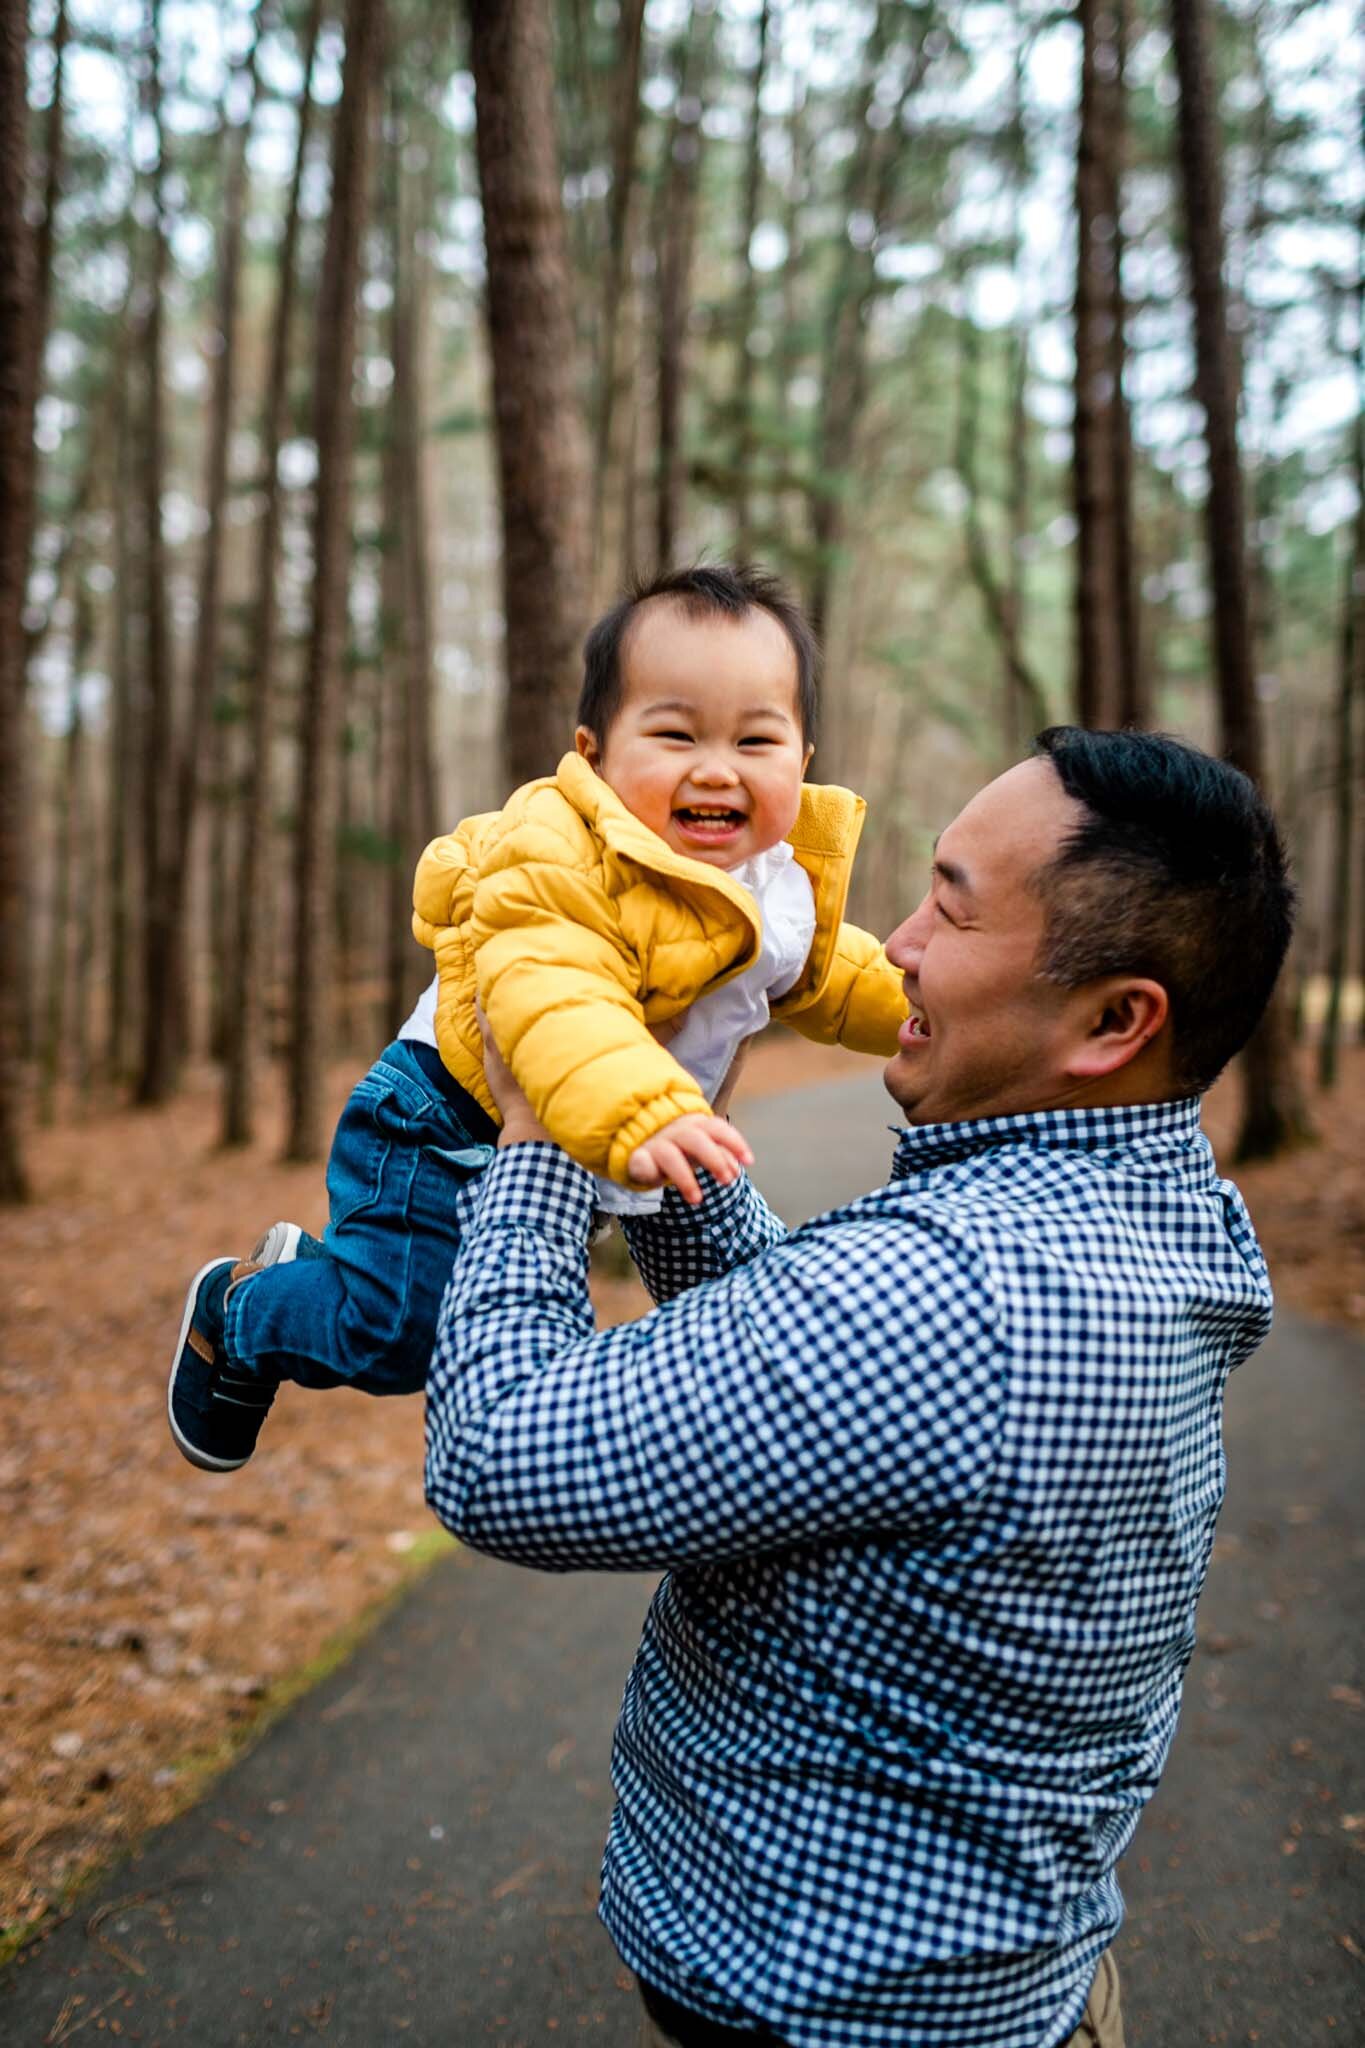 Raleigh Family Photographer | By G. Lin Photography | Umstead Park | Father tossing baby in the air and laughing